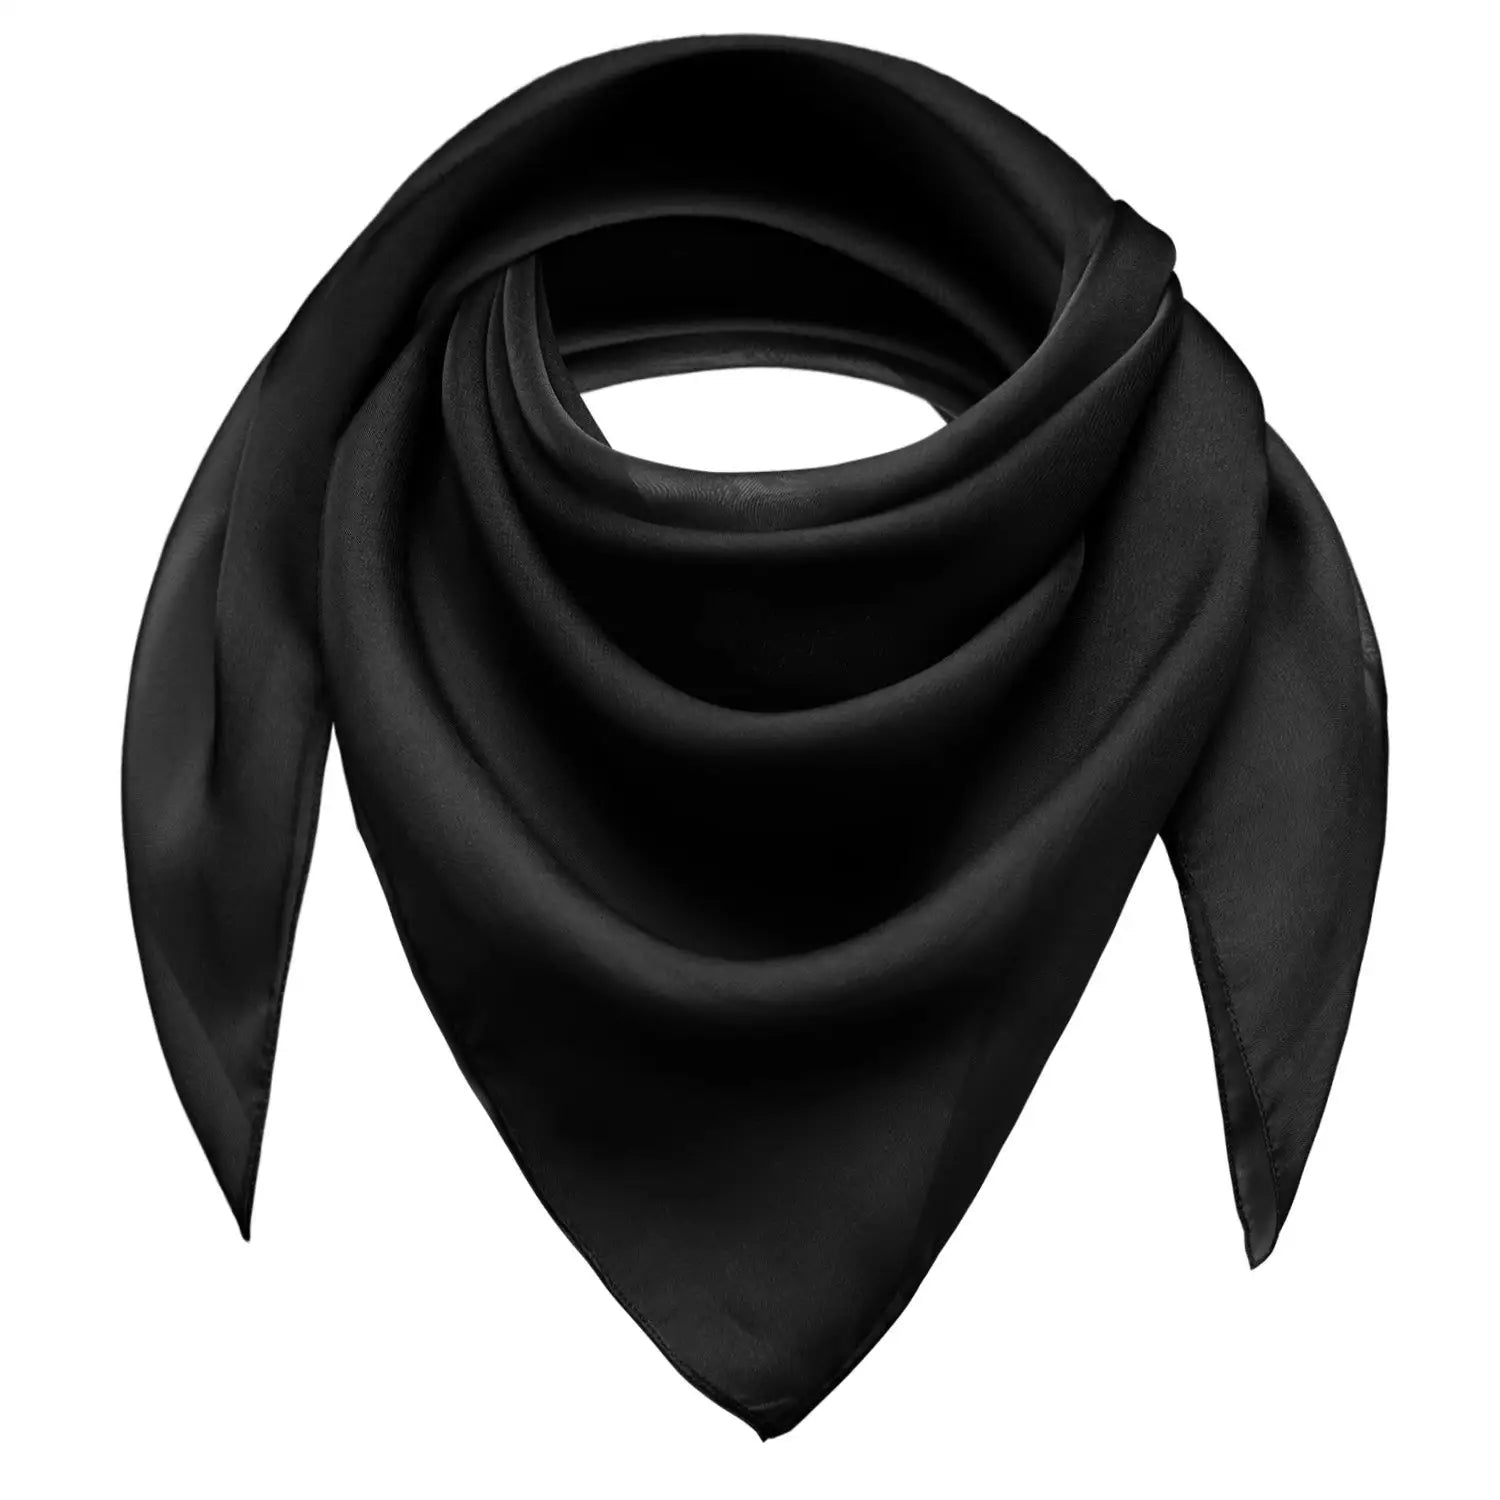 Black chiffon square scarf on white background - Lightweight, square neck scarf for women.